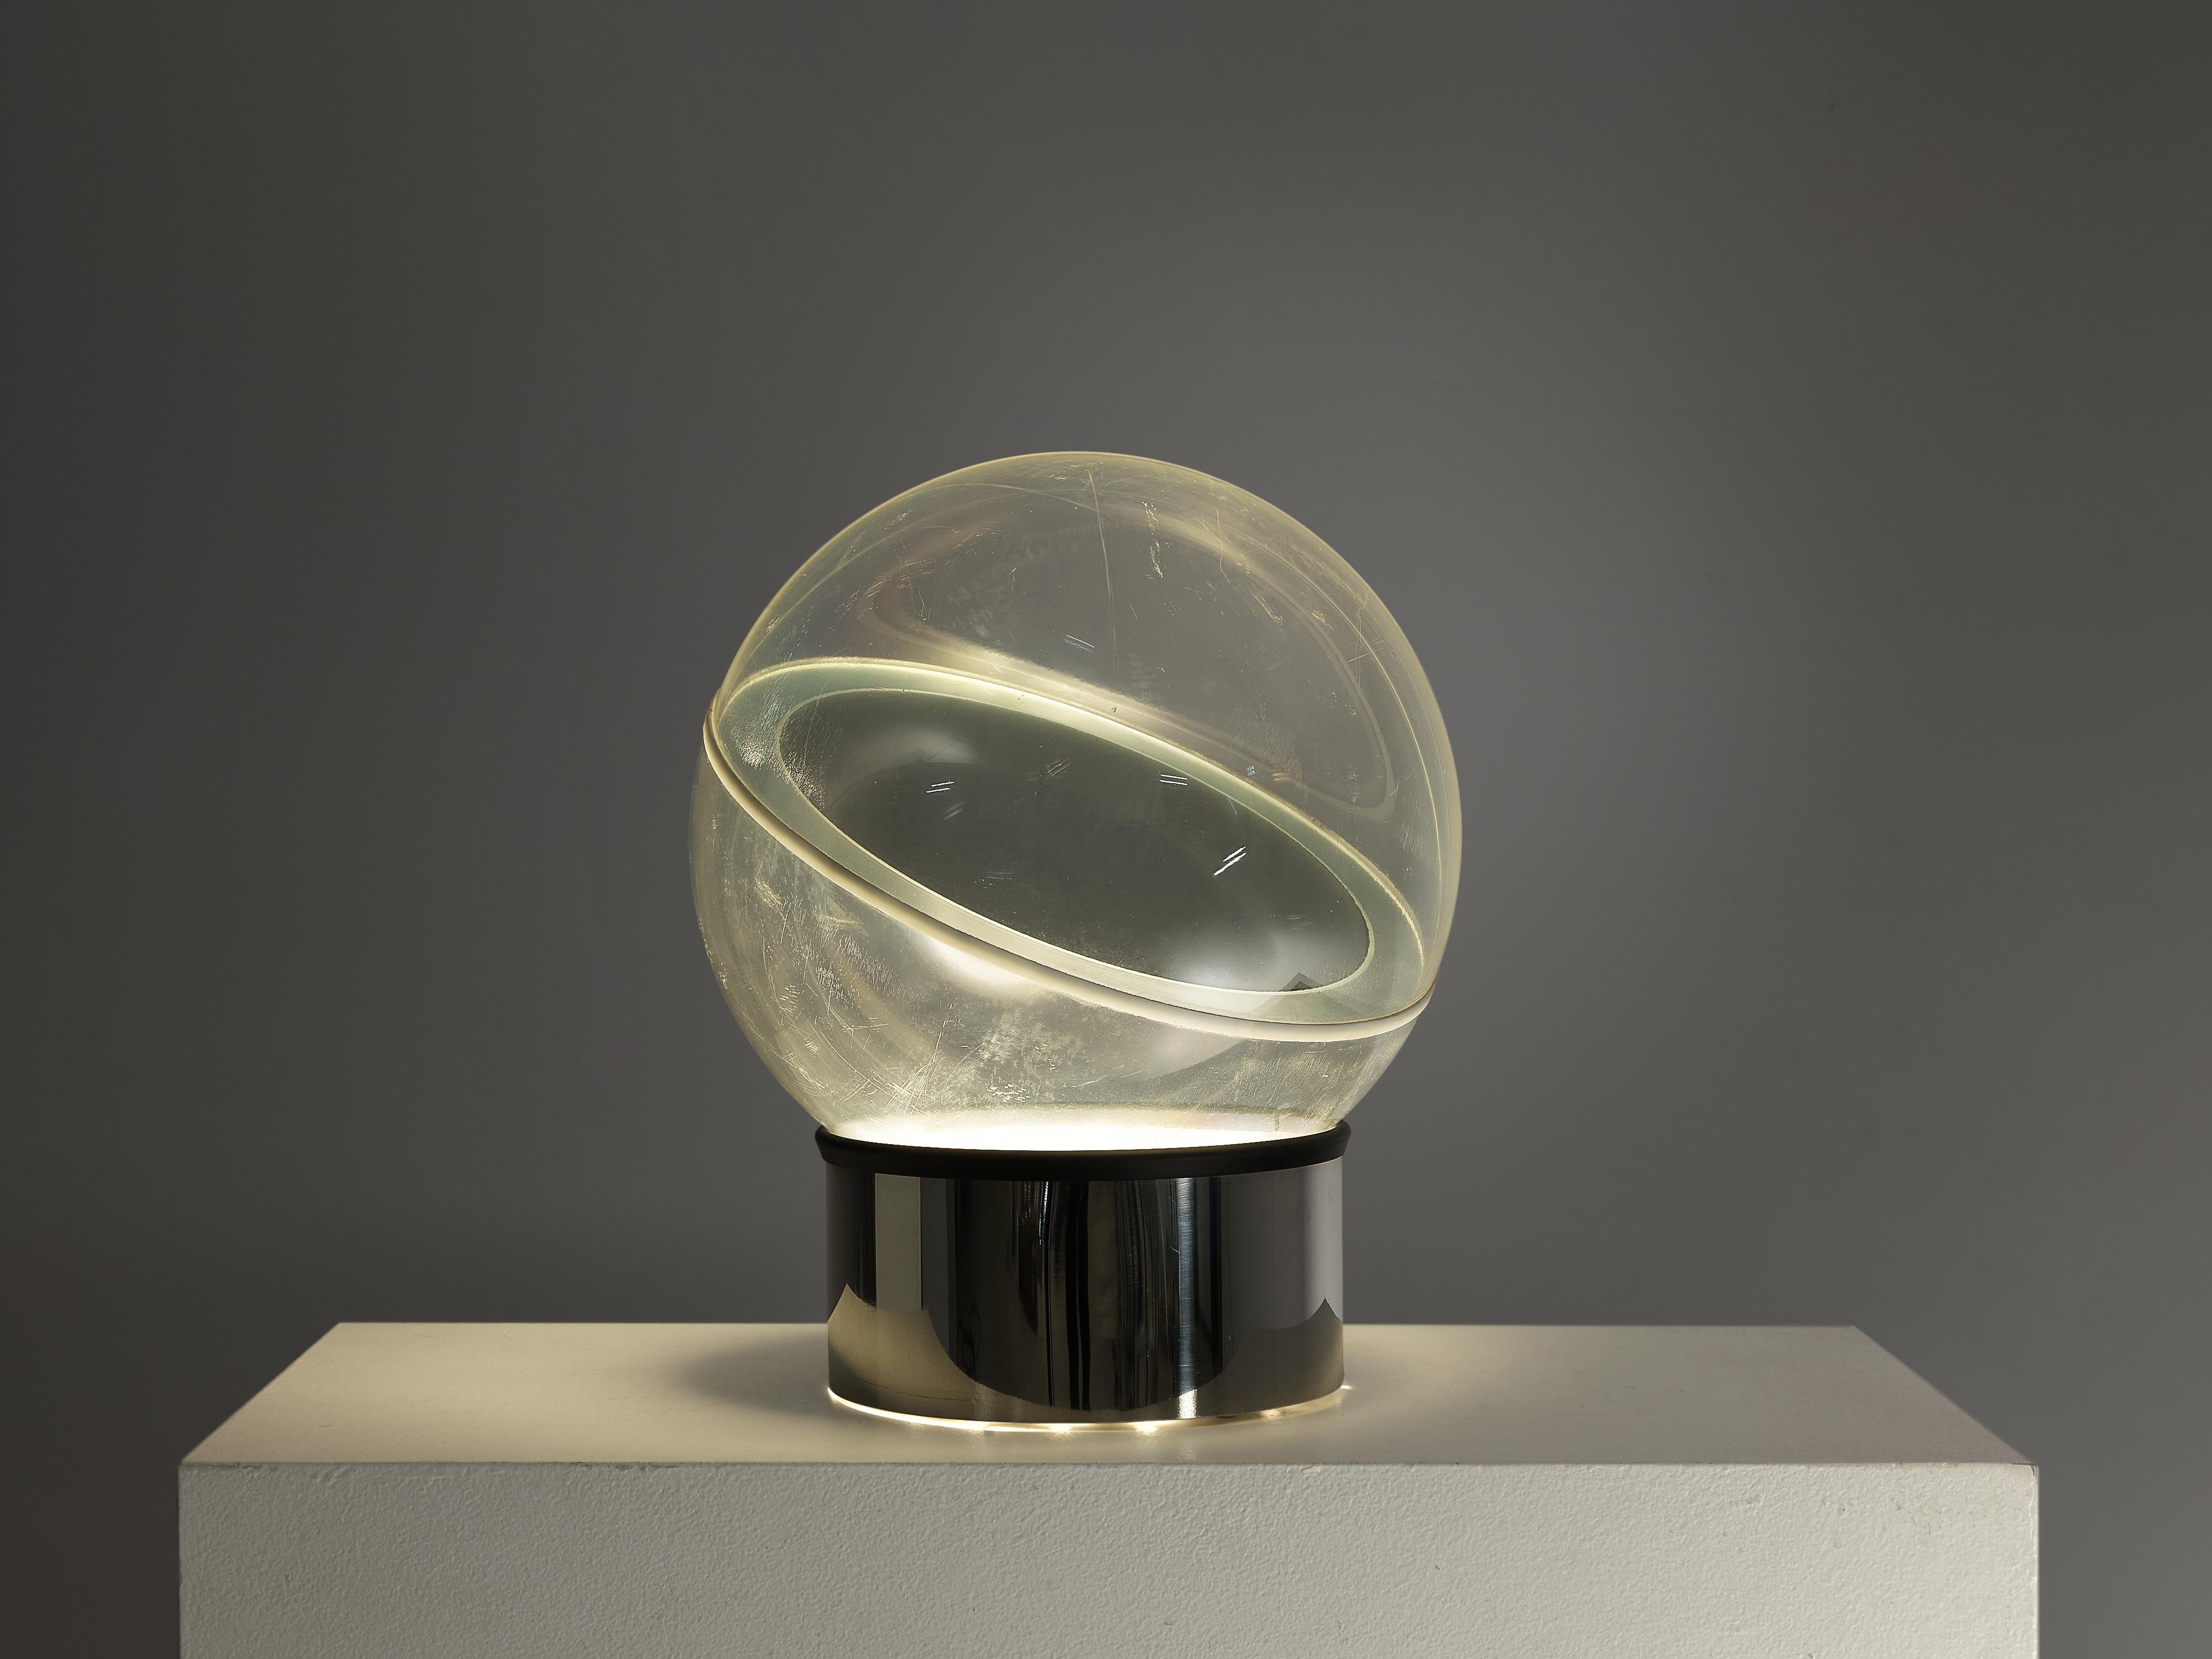 Filippo Panseca for Kartell, table lamp, model '4044', chrome-plated brass, perspex, neon, Italy, 1968.

Futuristic spherical lamp designed by Italian designer Filippo Panseca for Kartell. Its design is reminiscent to the designs typical for Space